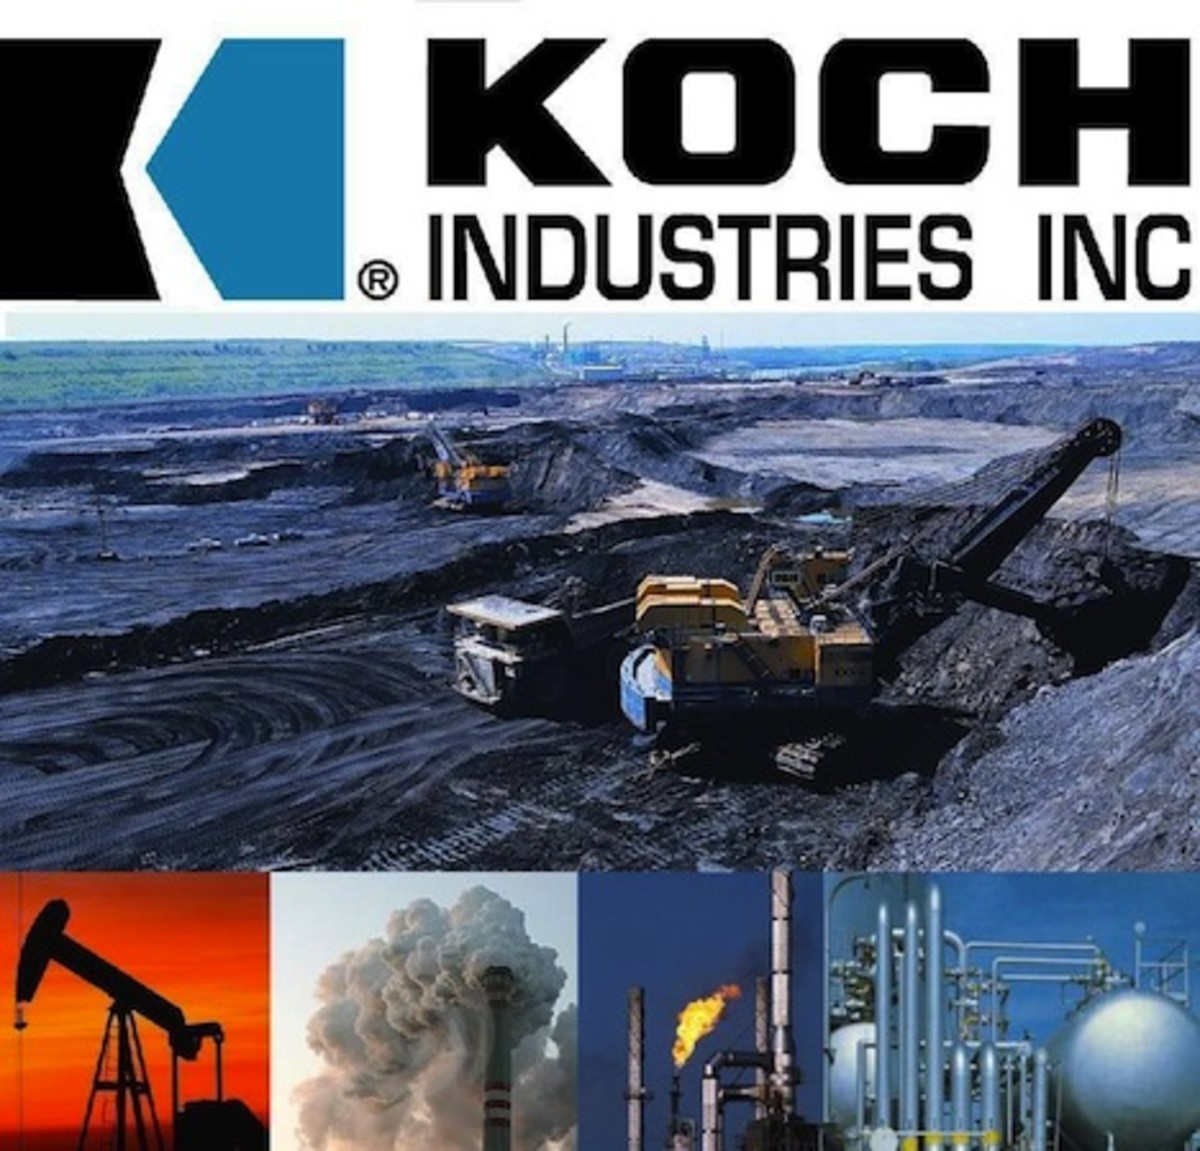 People have got to begin to get to know the fats on "Uber-Polluting Koch Industries